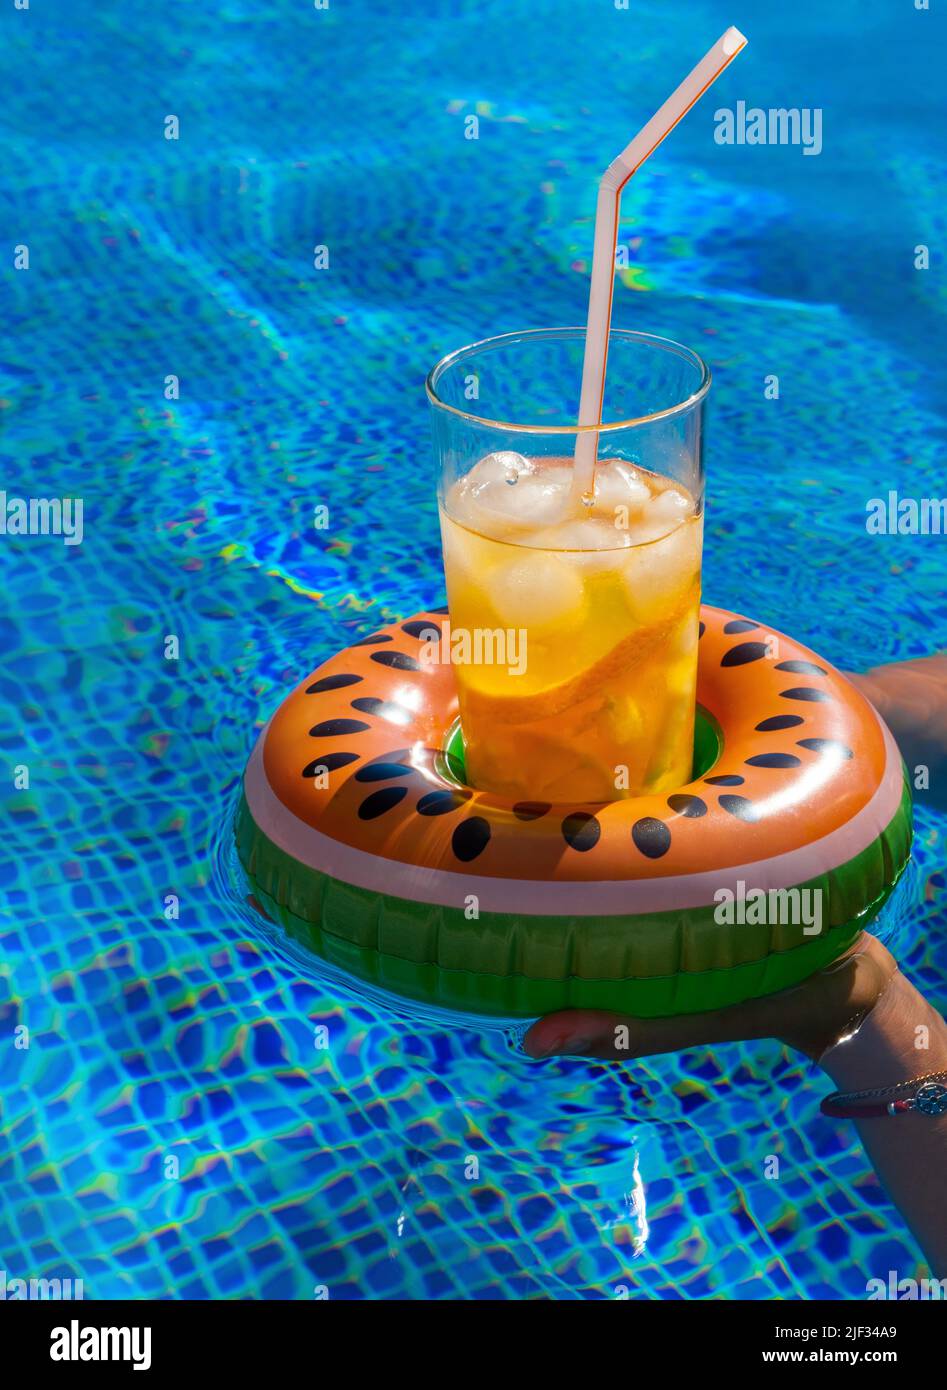 https://c8.alamy.com/comp/2JF34A9/cold-refreshing-drink-with-ice-and-a-straw-in-the-inflatable-ring-in-shape-of-watermelon-in-a-womans-hand-in-a-pool-of-blue-water-concept-of-summer-2JF34A9.jpg